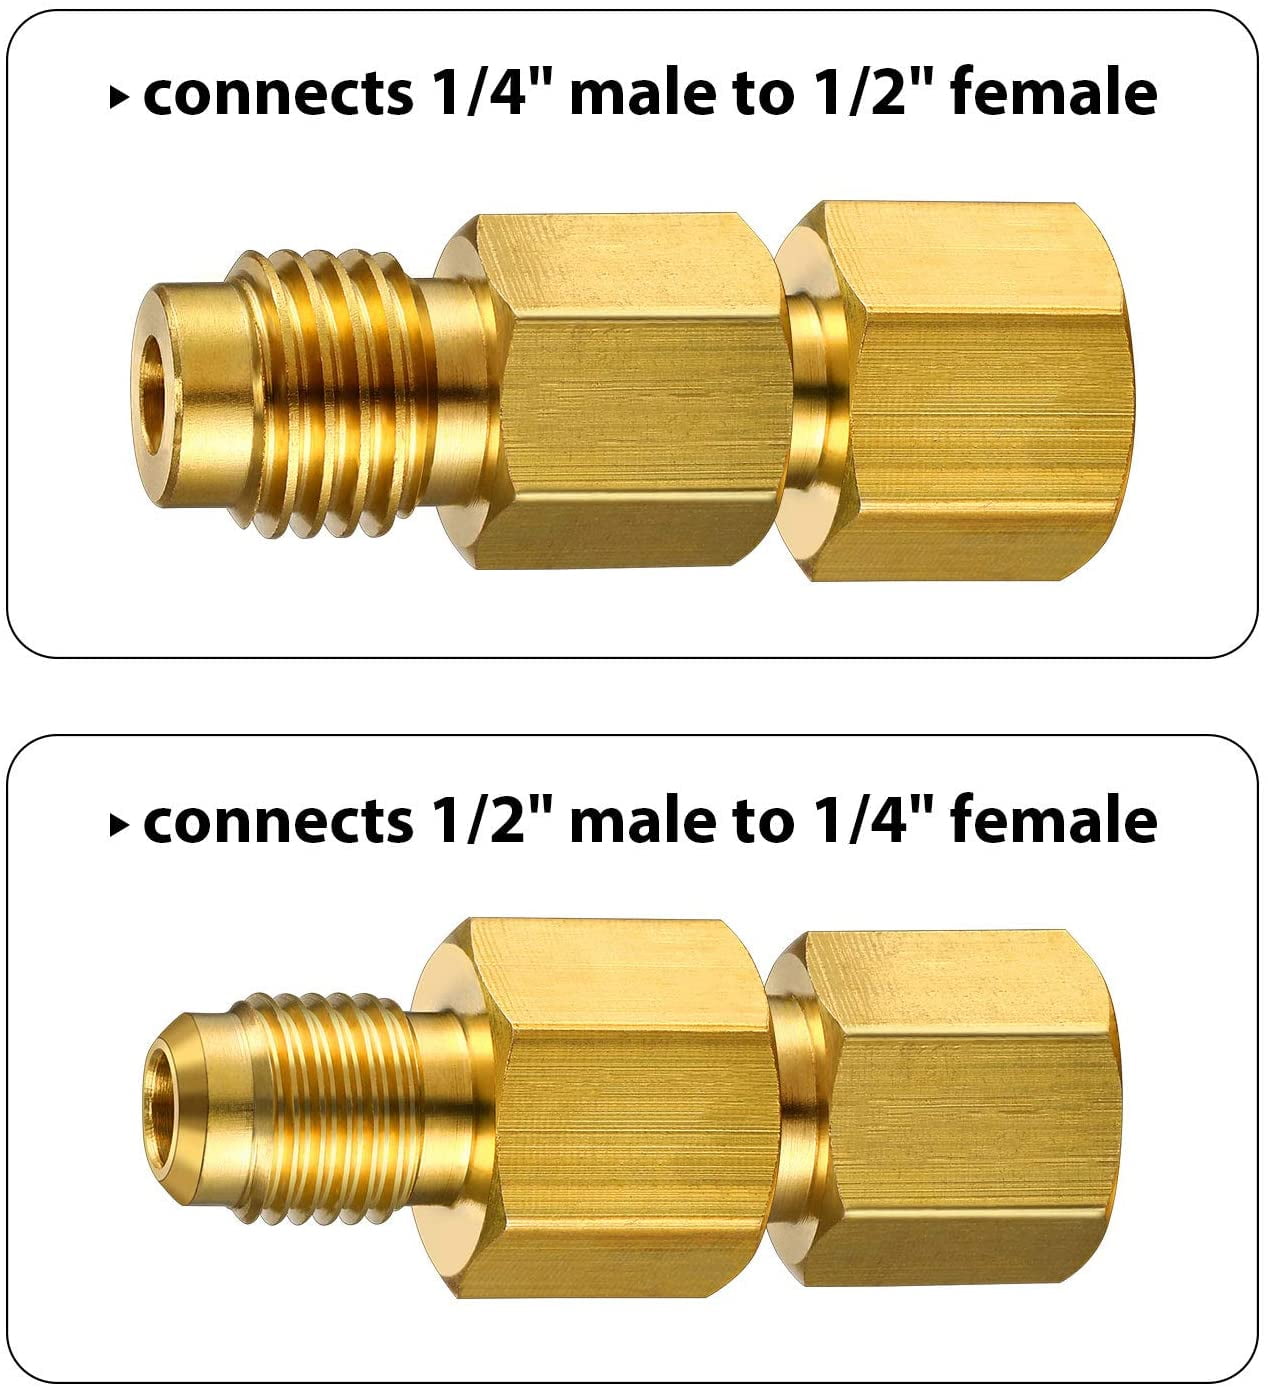 3 Pieces R12 R22 to R134A Adapters 6015 R134A Brass Refrigerant Tank Adapter to R12 Fitting Adapter 1/2 Female to 1/4 Male Flare Adaptor Valve Core 6014 Vacuum Pump Adapter 1/2 Male to 1/4 Female 